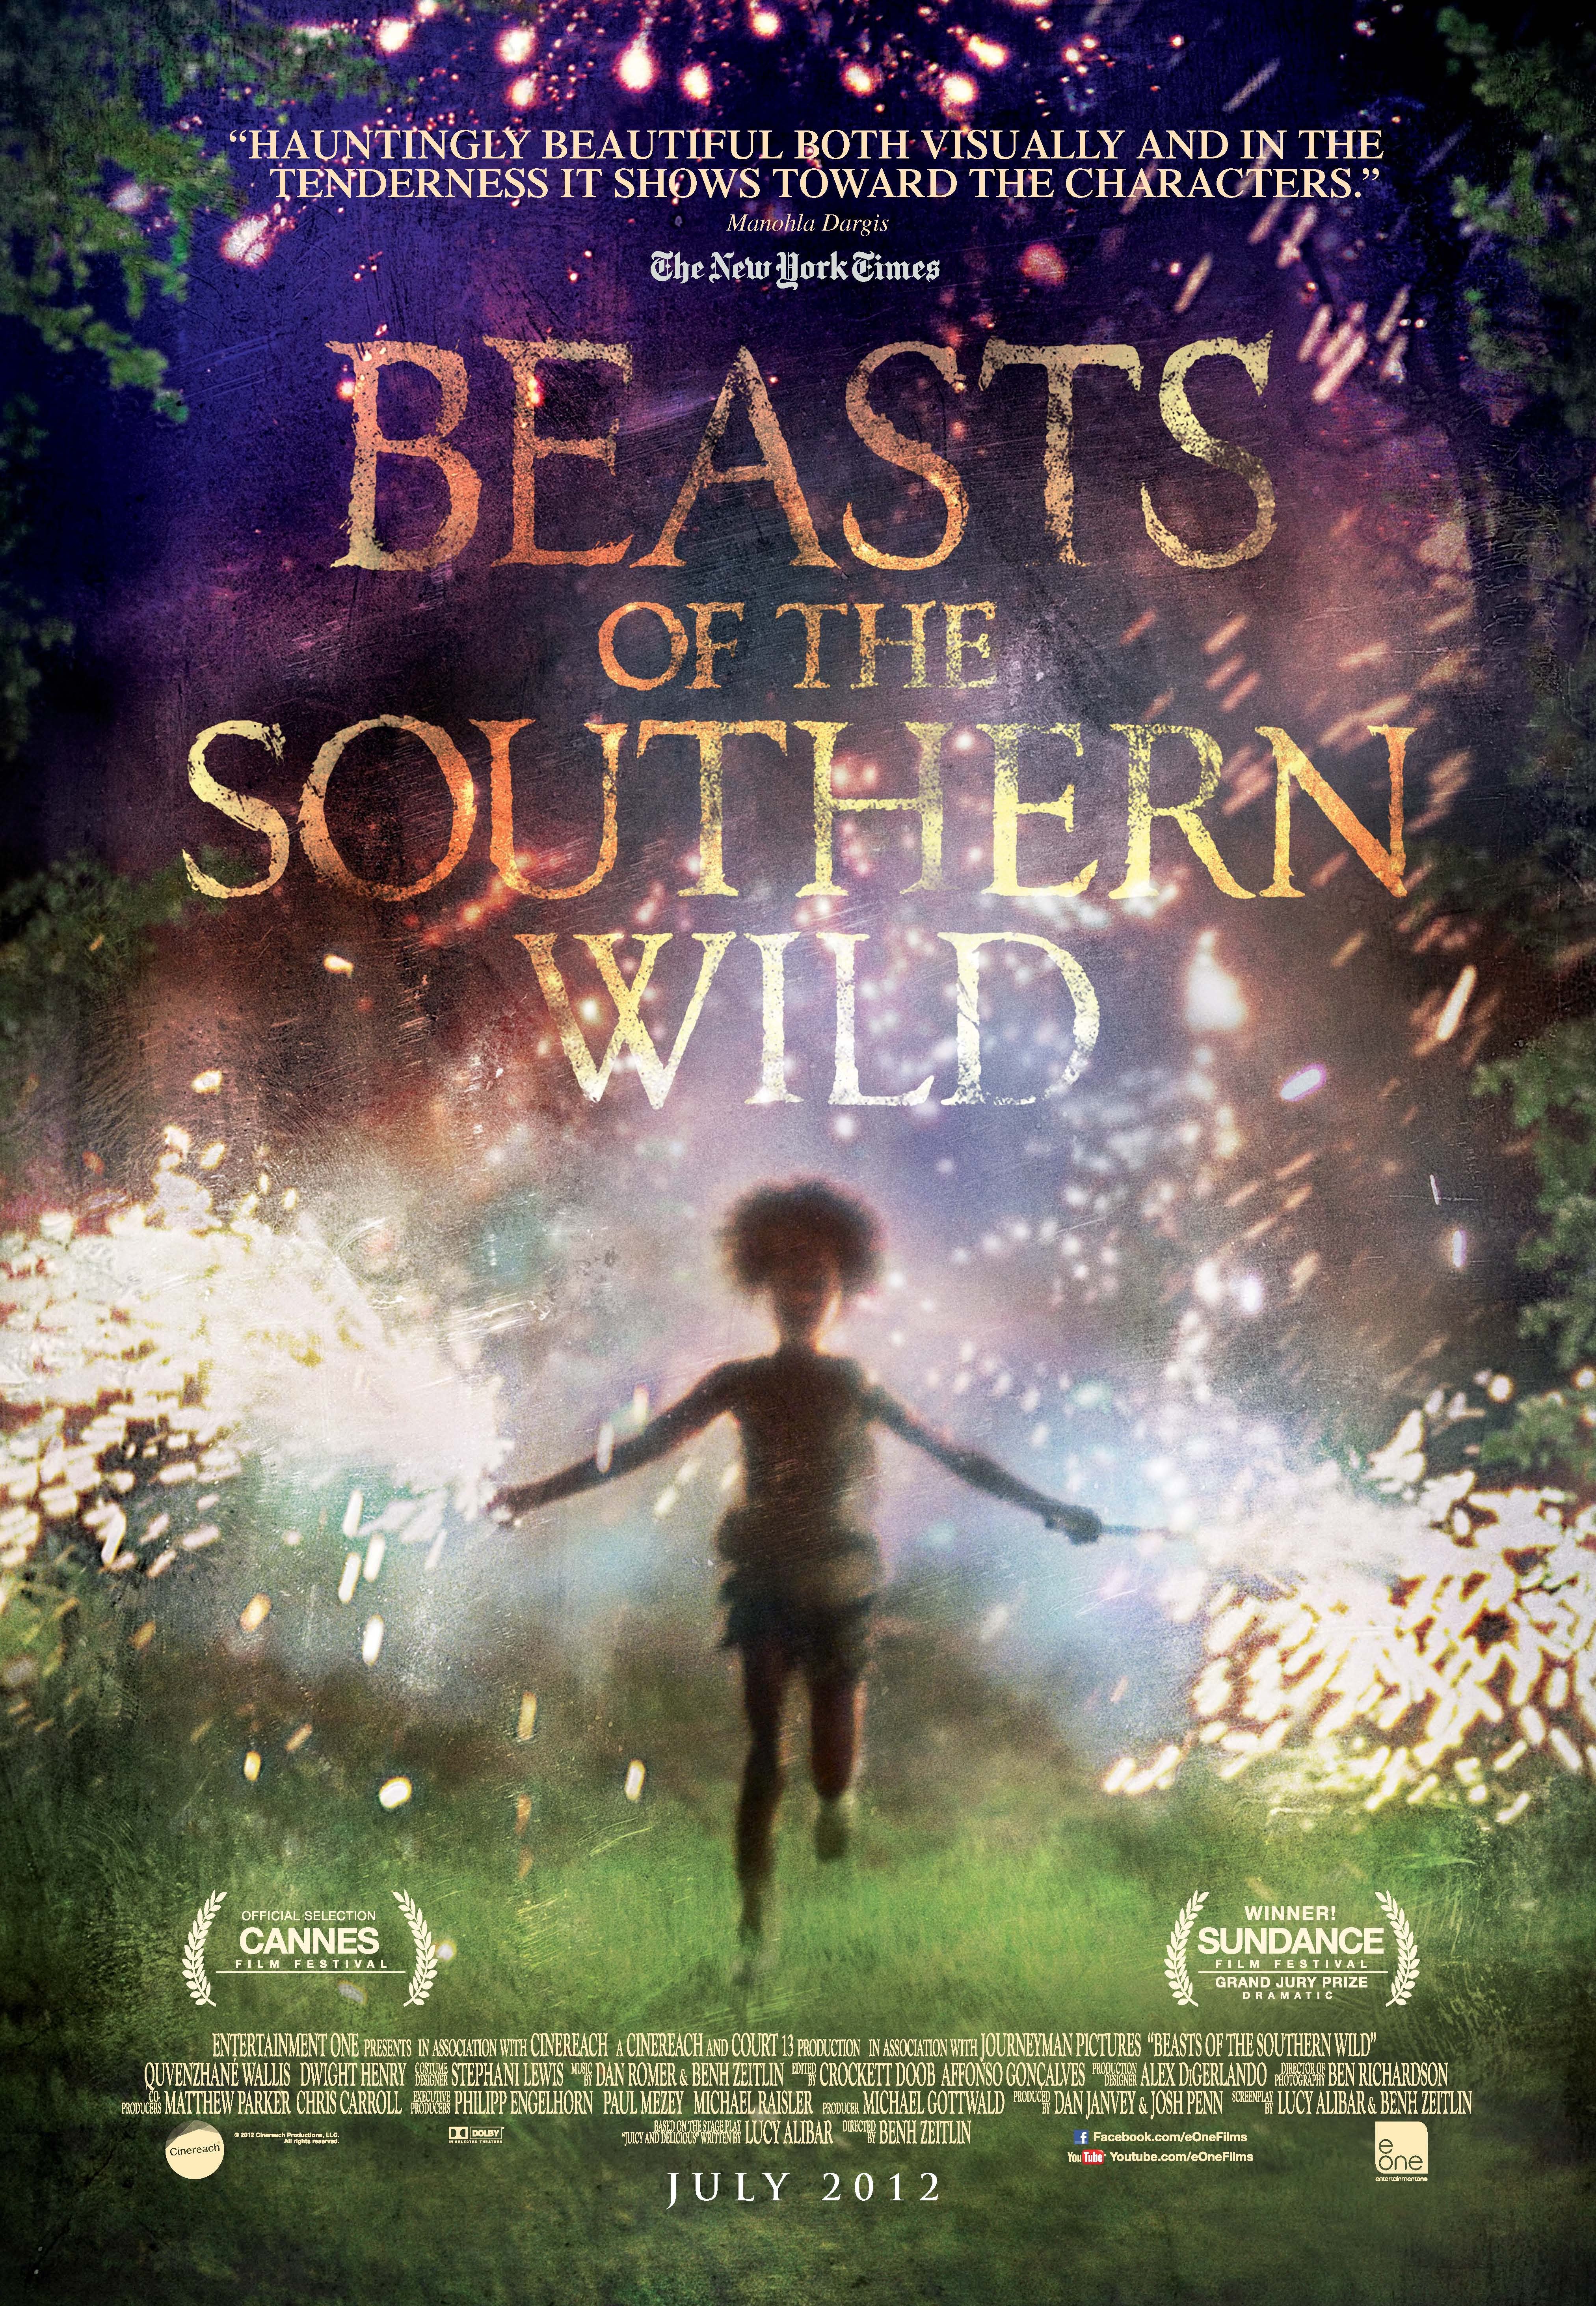 L'affiche du film Beasts of the Southern Wild